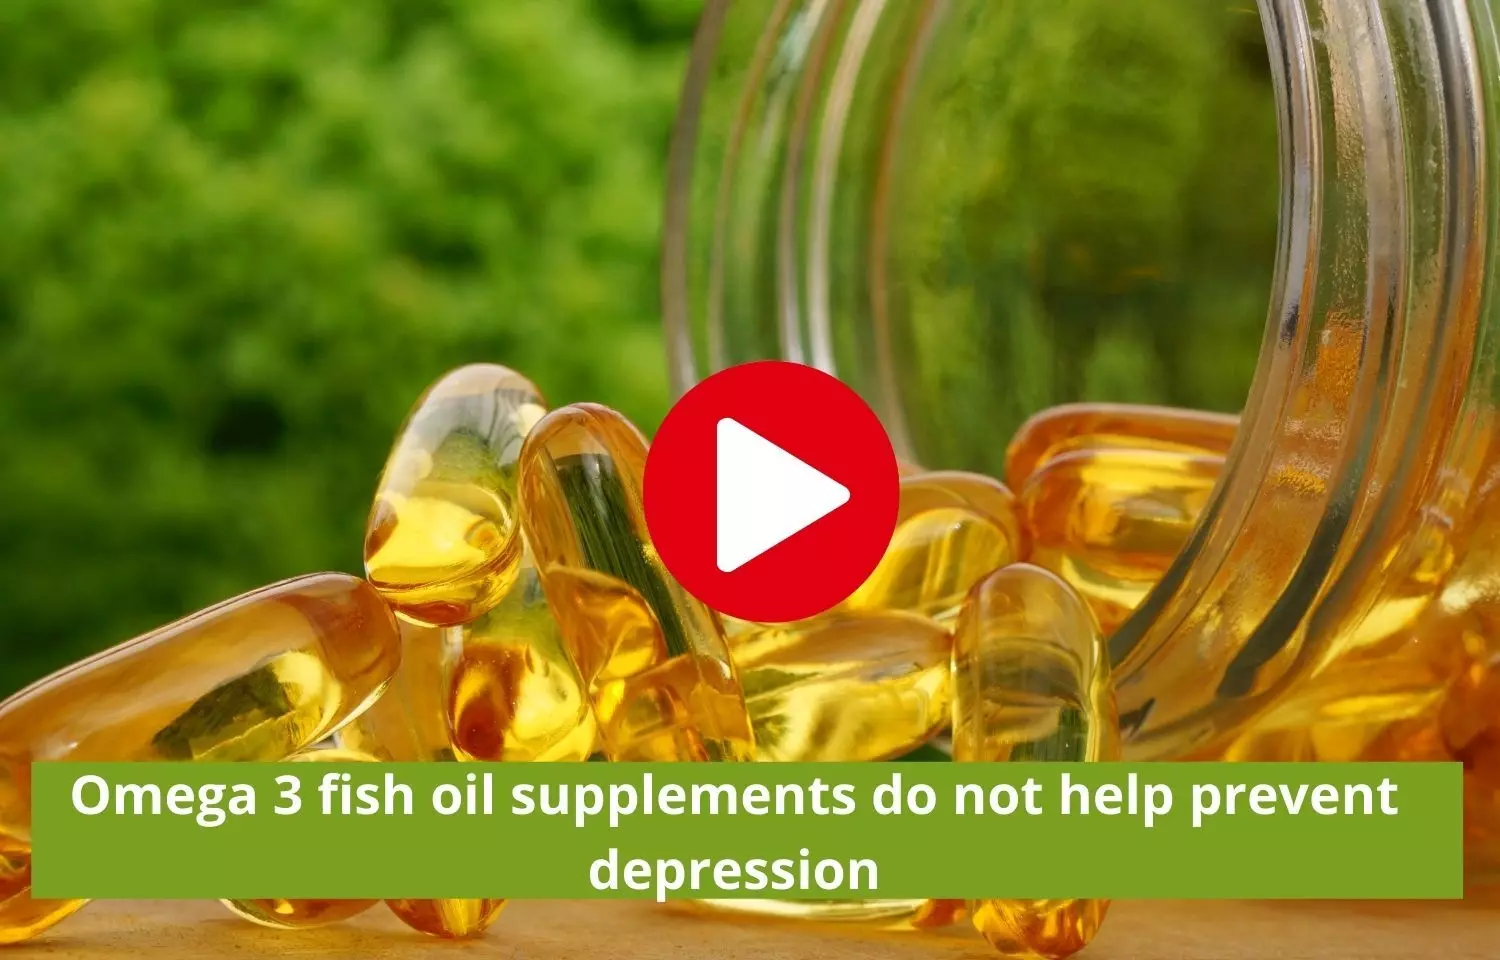 Omega 3 fish oil supplements not tied to depression prevention